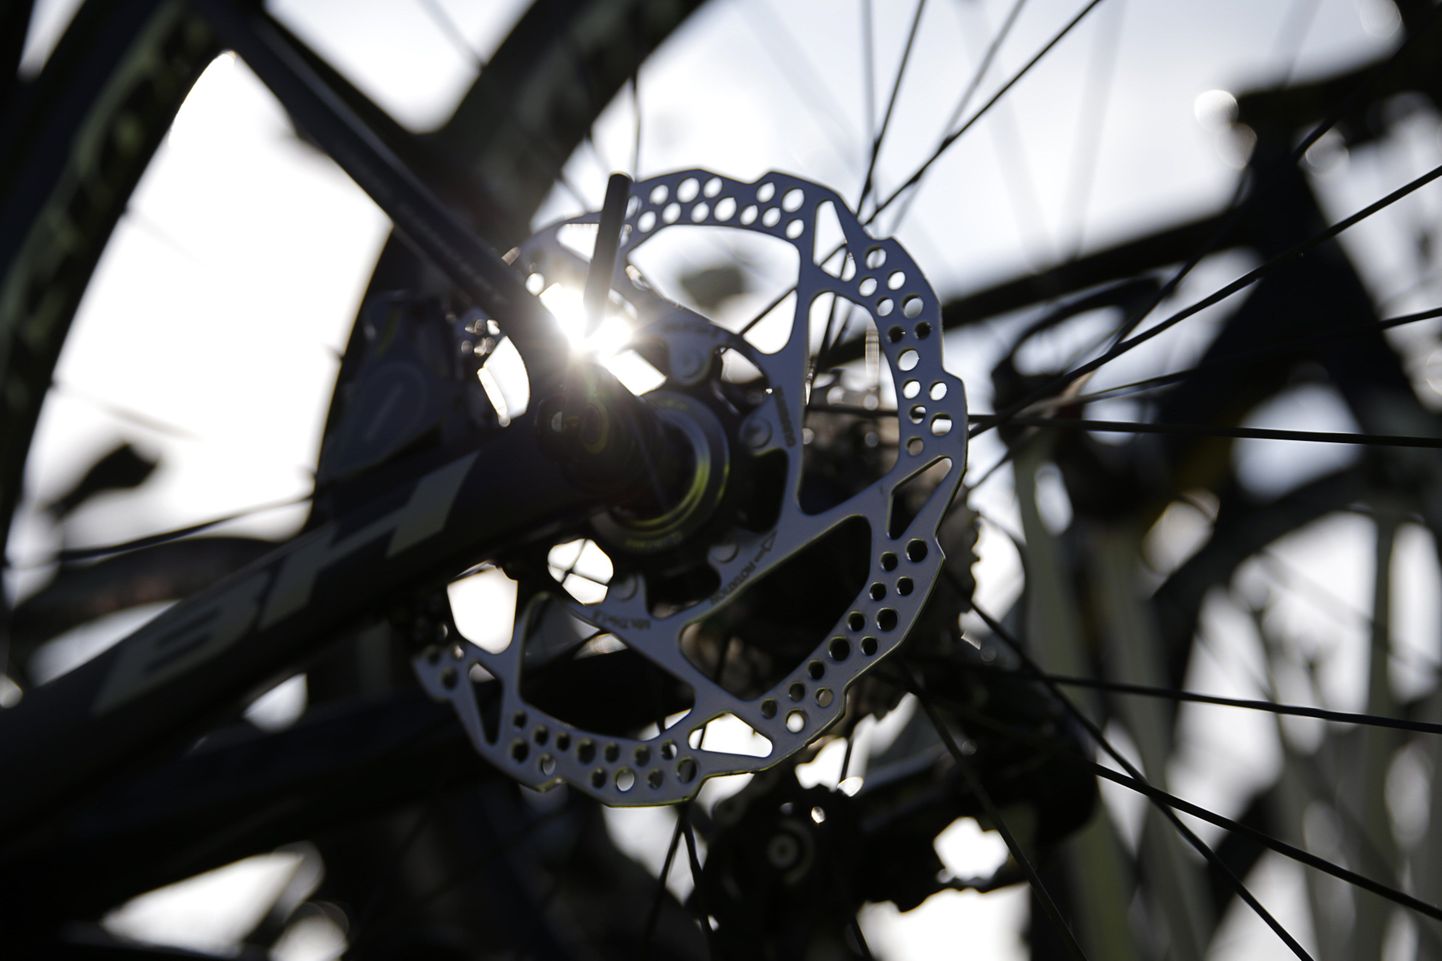 The disc brake of a bike of France's Direct Energie cycling team is pictured prior to the start of the 114th edition of the Paris-Roubaix one-day classic cycling race, between Compiegne and Roubaix, on April 10, 2016 in Compiegne.  The International Cycling Union (UCI) continue to test the use of disc brakes in 2016, with men and women professional riders allowed to use the new braking technology in races from January 1, 2016. AFP PHOTO / KENZO TRIBOUILLARD